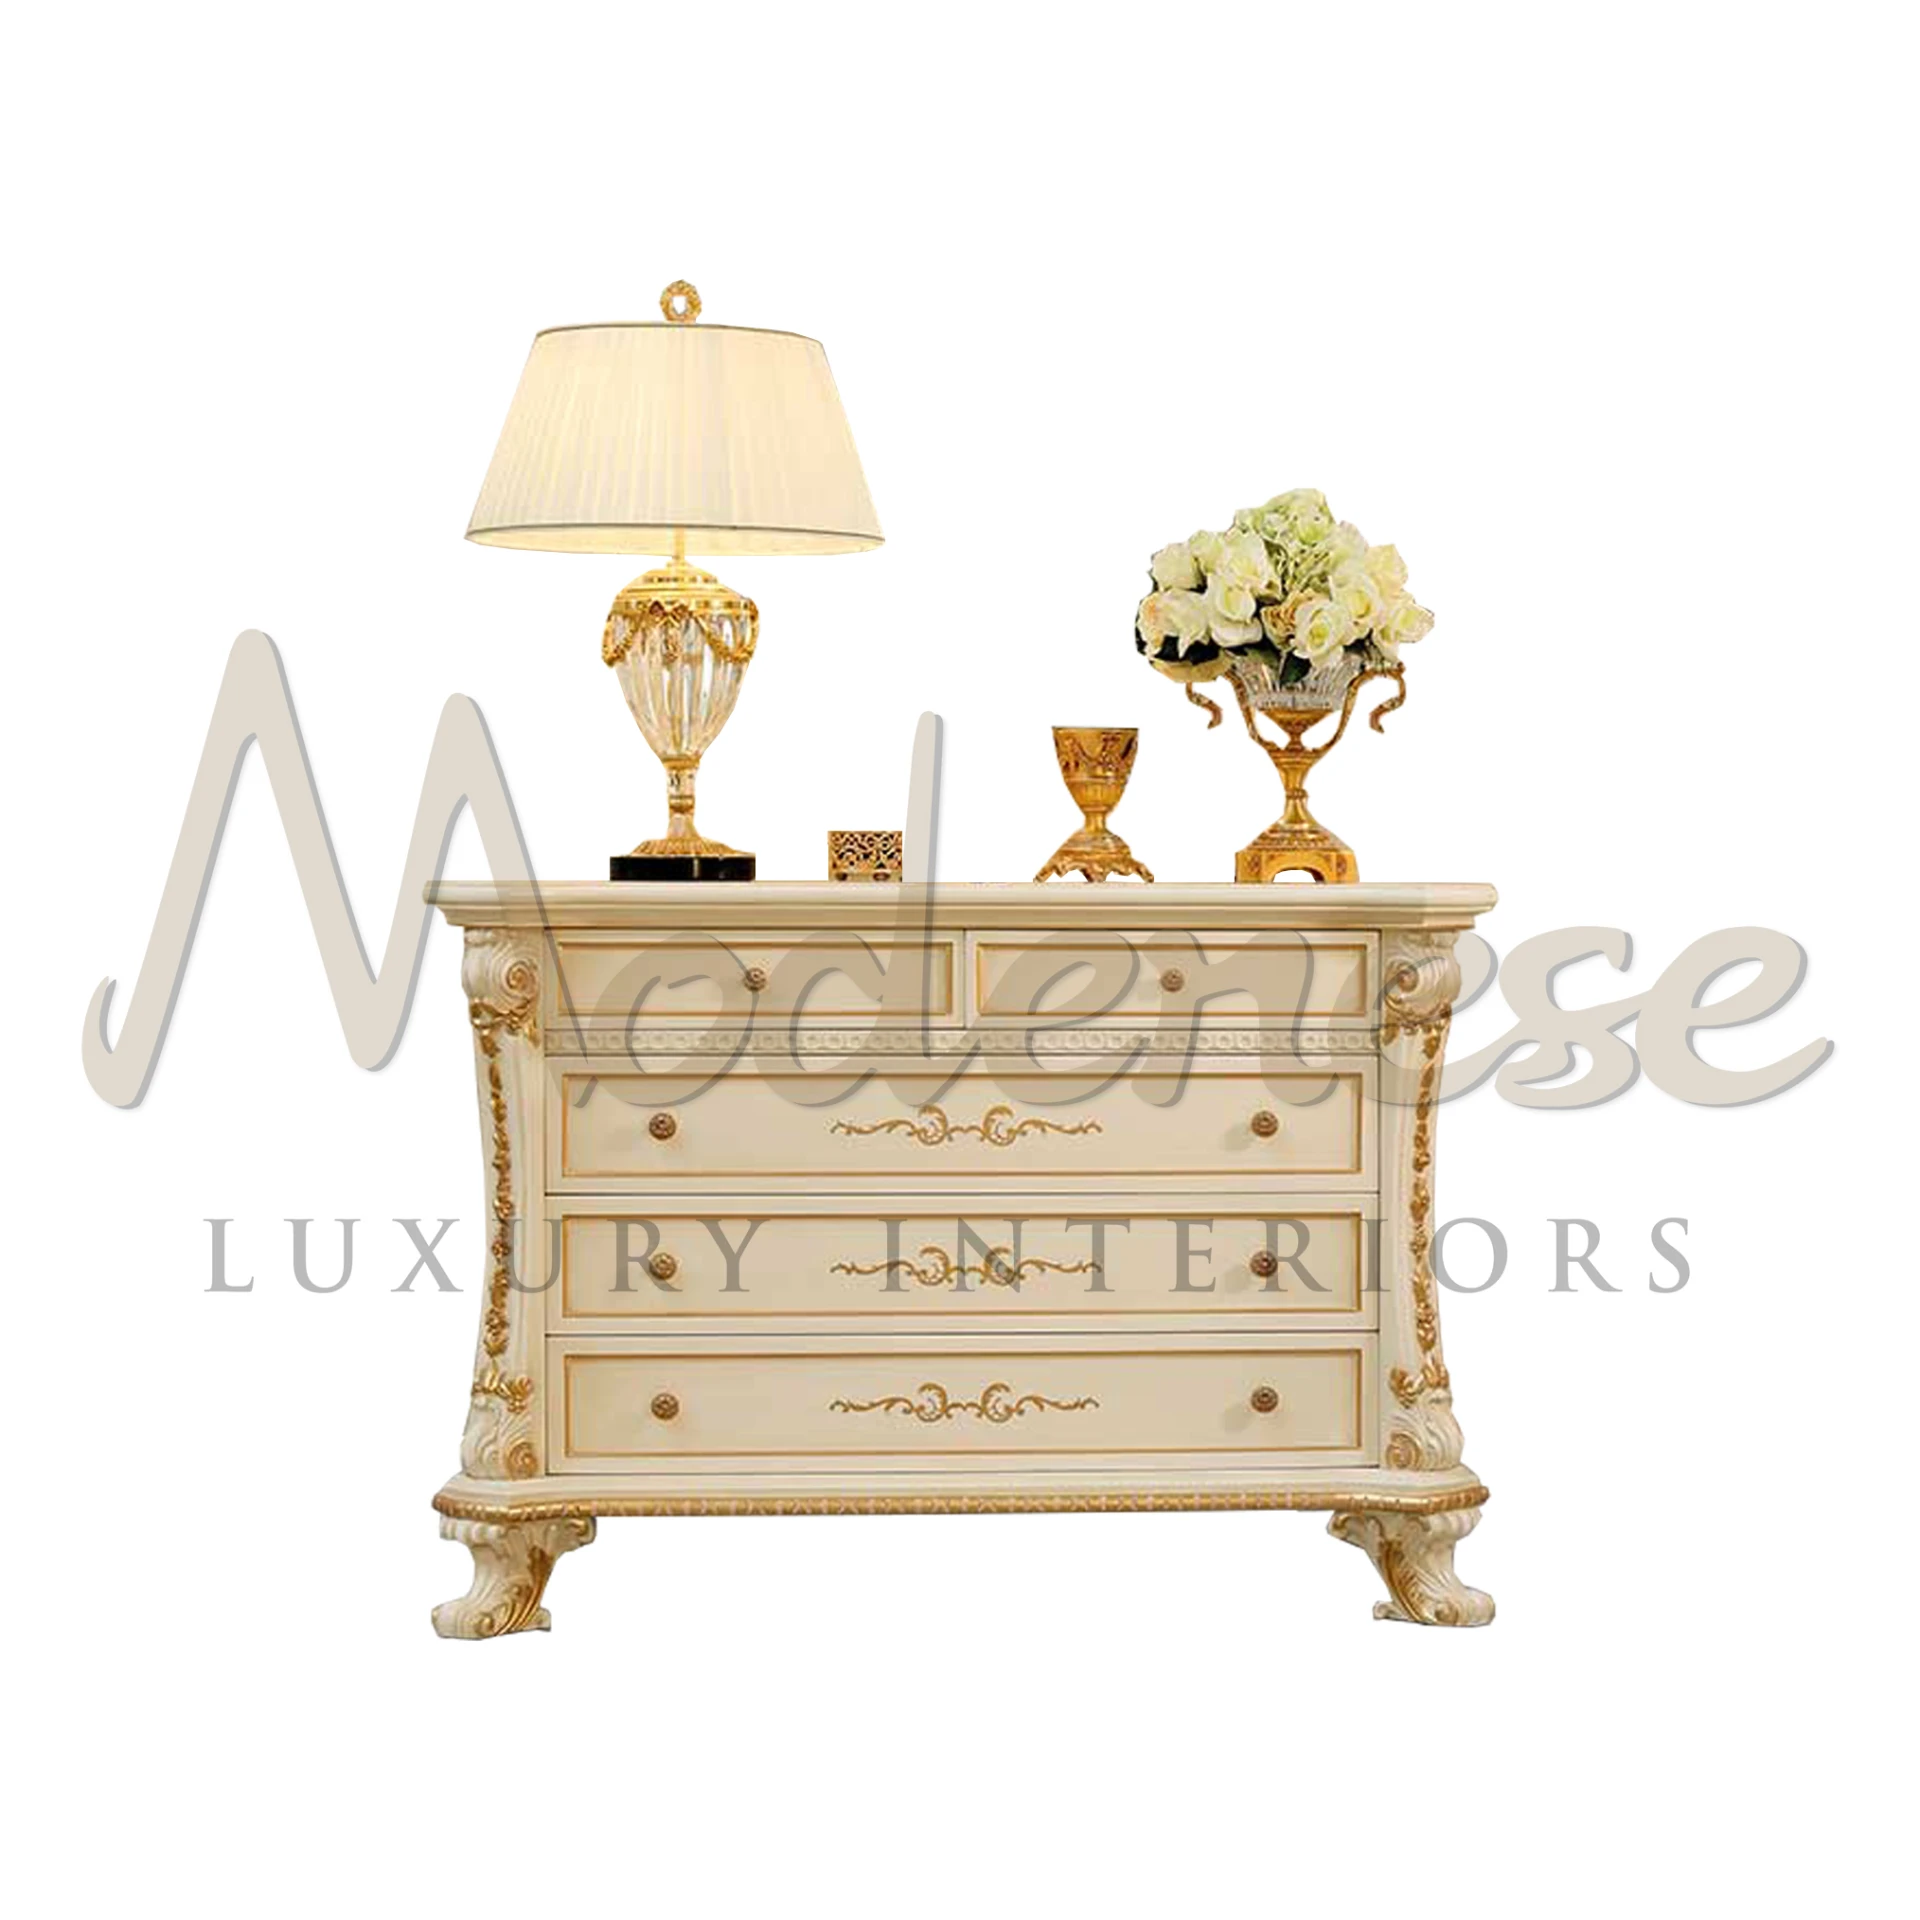 Elegant cream chest of drawers with ornate gold detailing and decorative tabletop accessories including a lamp and a vase of flowers.                     